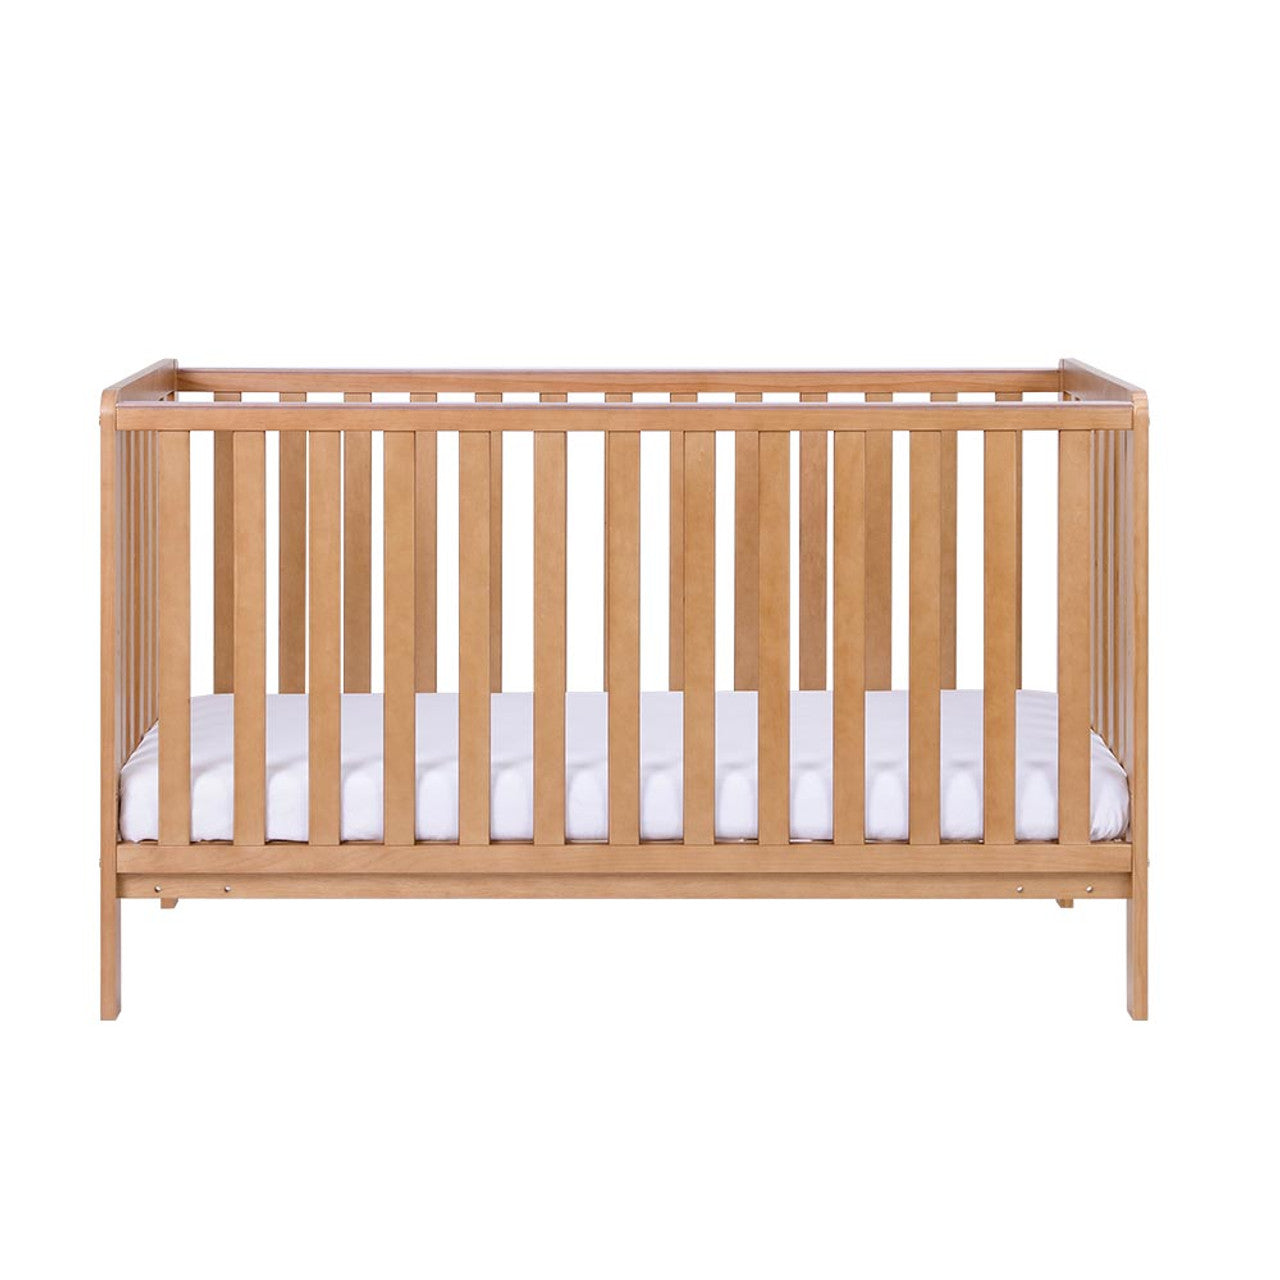 Tutti Bambini Malmo Cot Bed with Rio 2 Piece Room Set - Oak / Dove Grey - For Your Little One